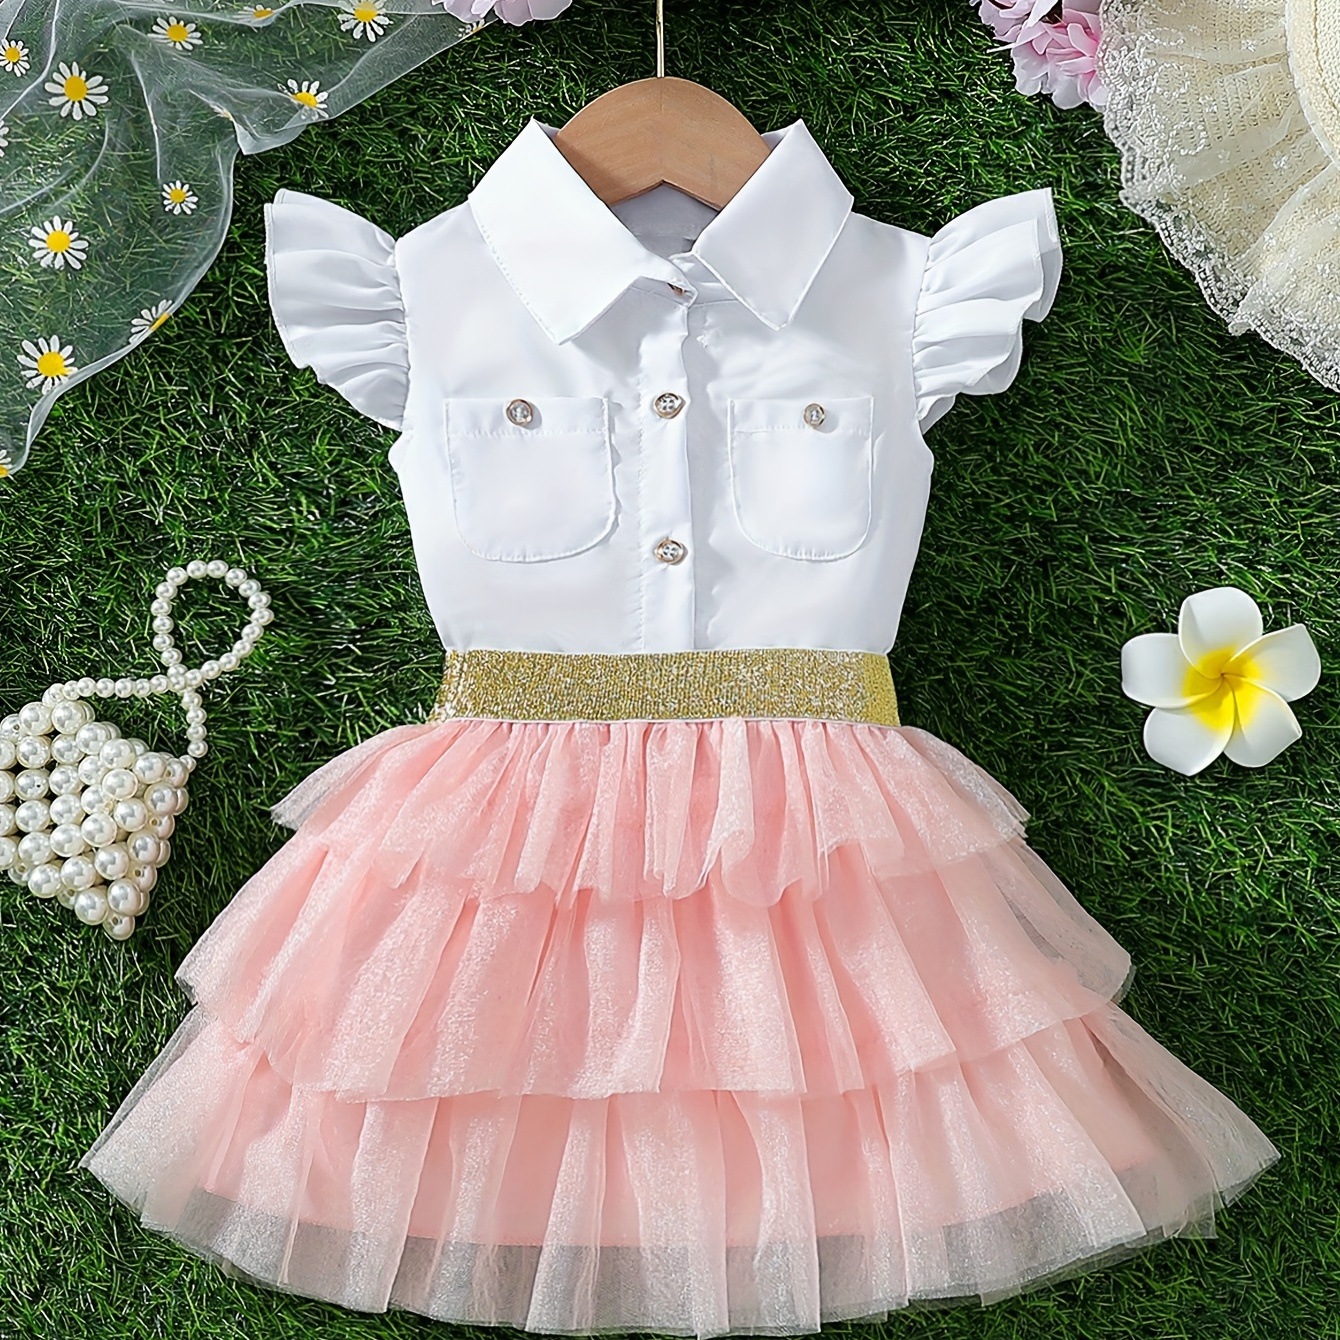 

Baby's Lovely 2pcs Summer Outfit, Cap Sleeve Blouse & Layered Mesh Tutu Skirt Set, Toddler & Infant Girl's Clothes